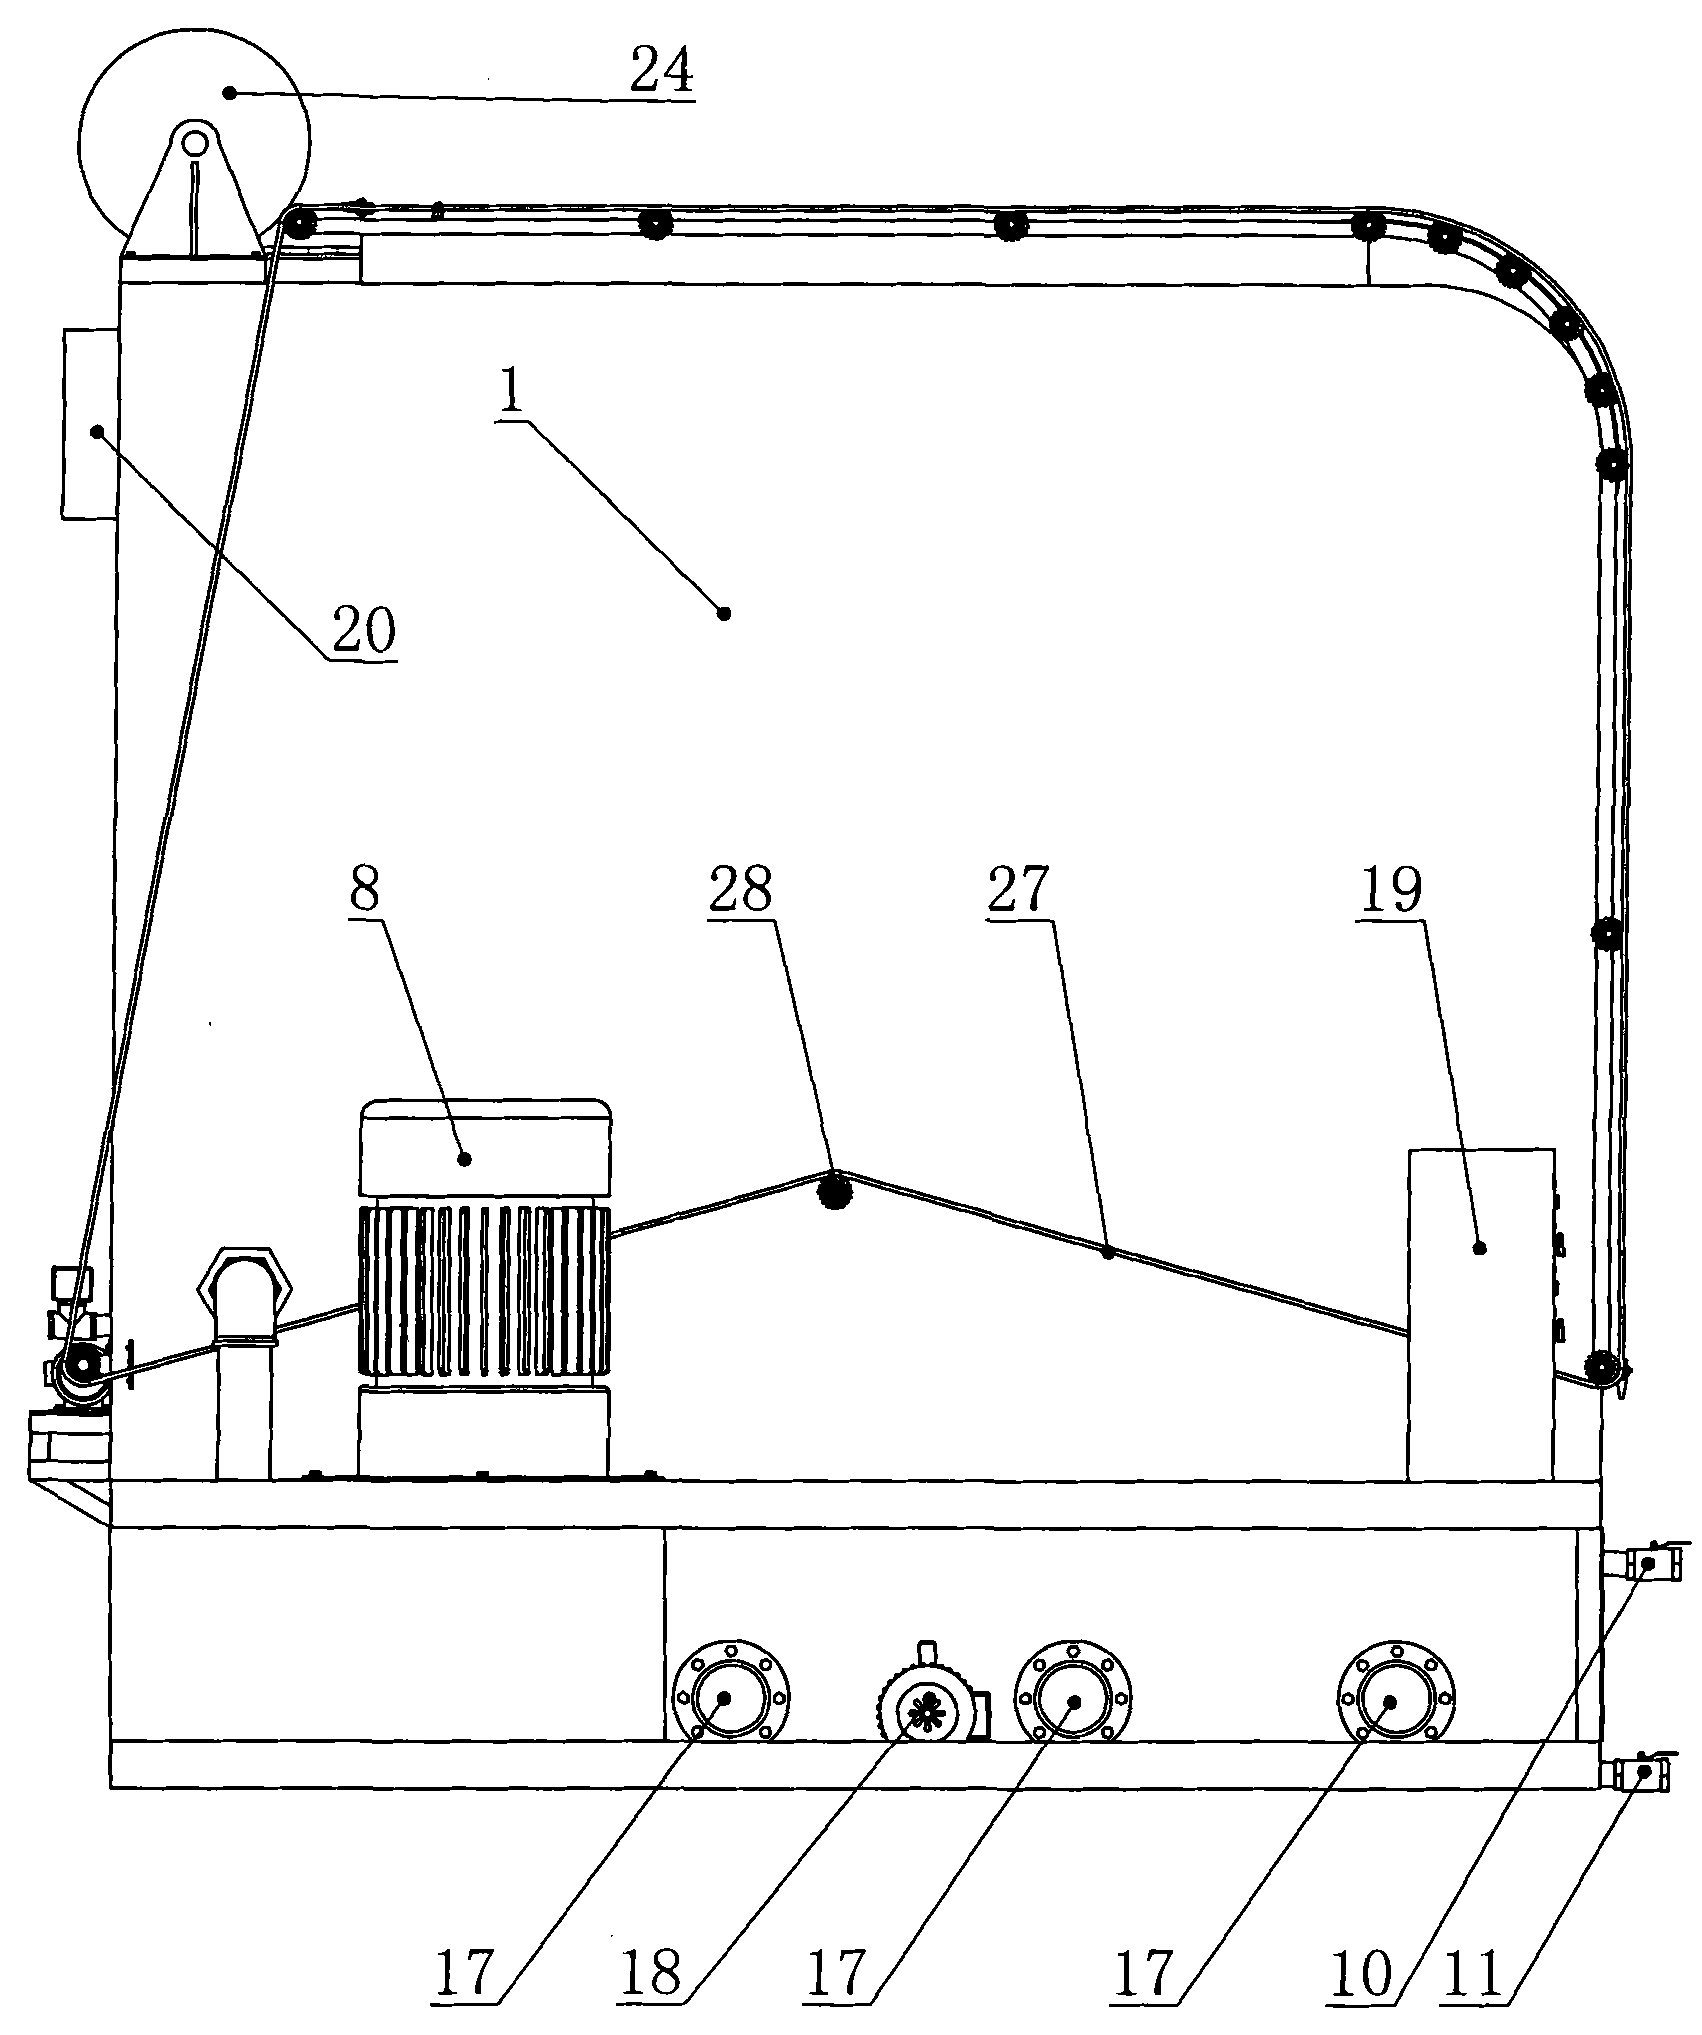 Device for automatically cleaning and rinsing heavy equipment and parts